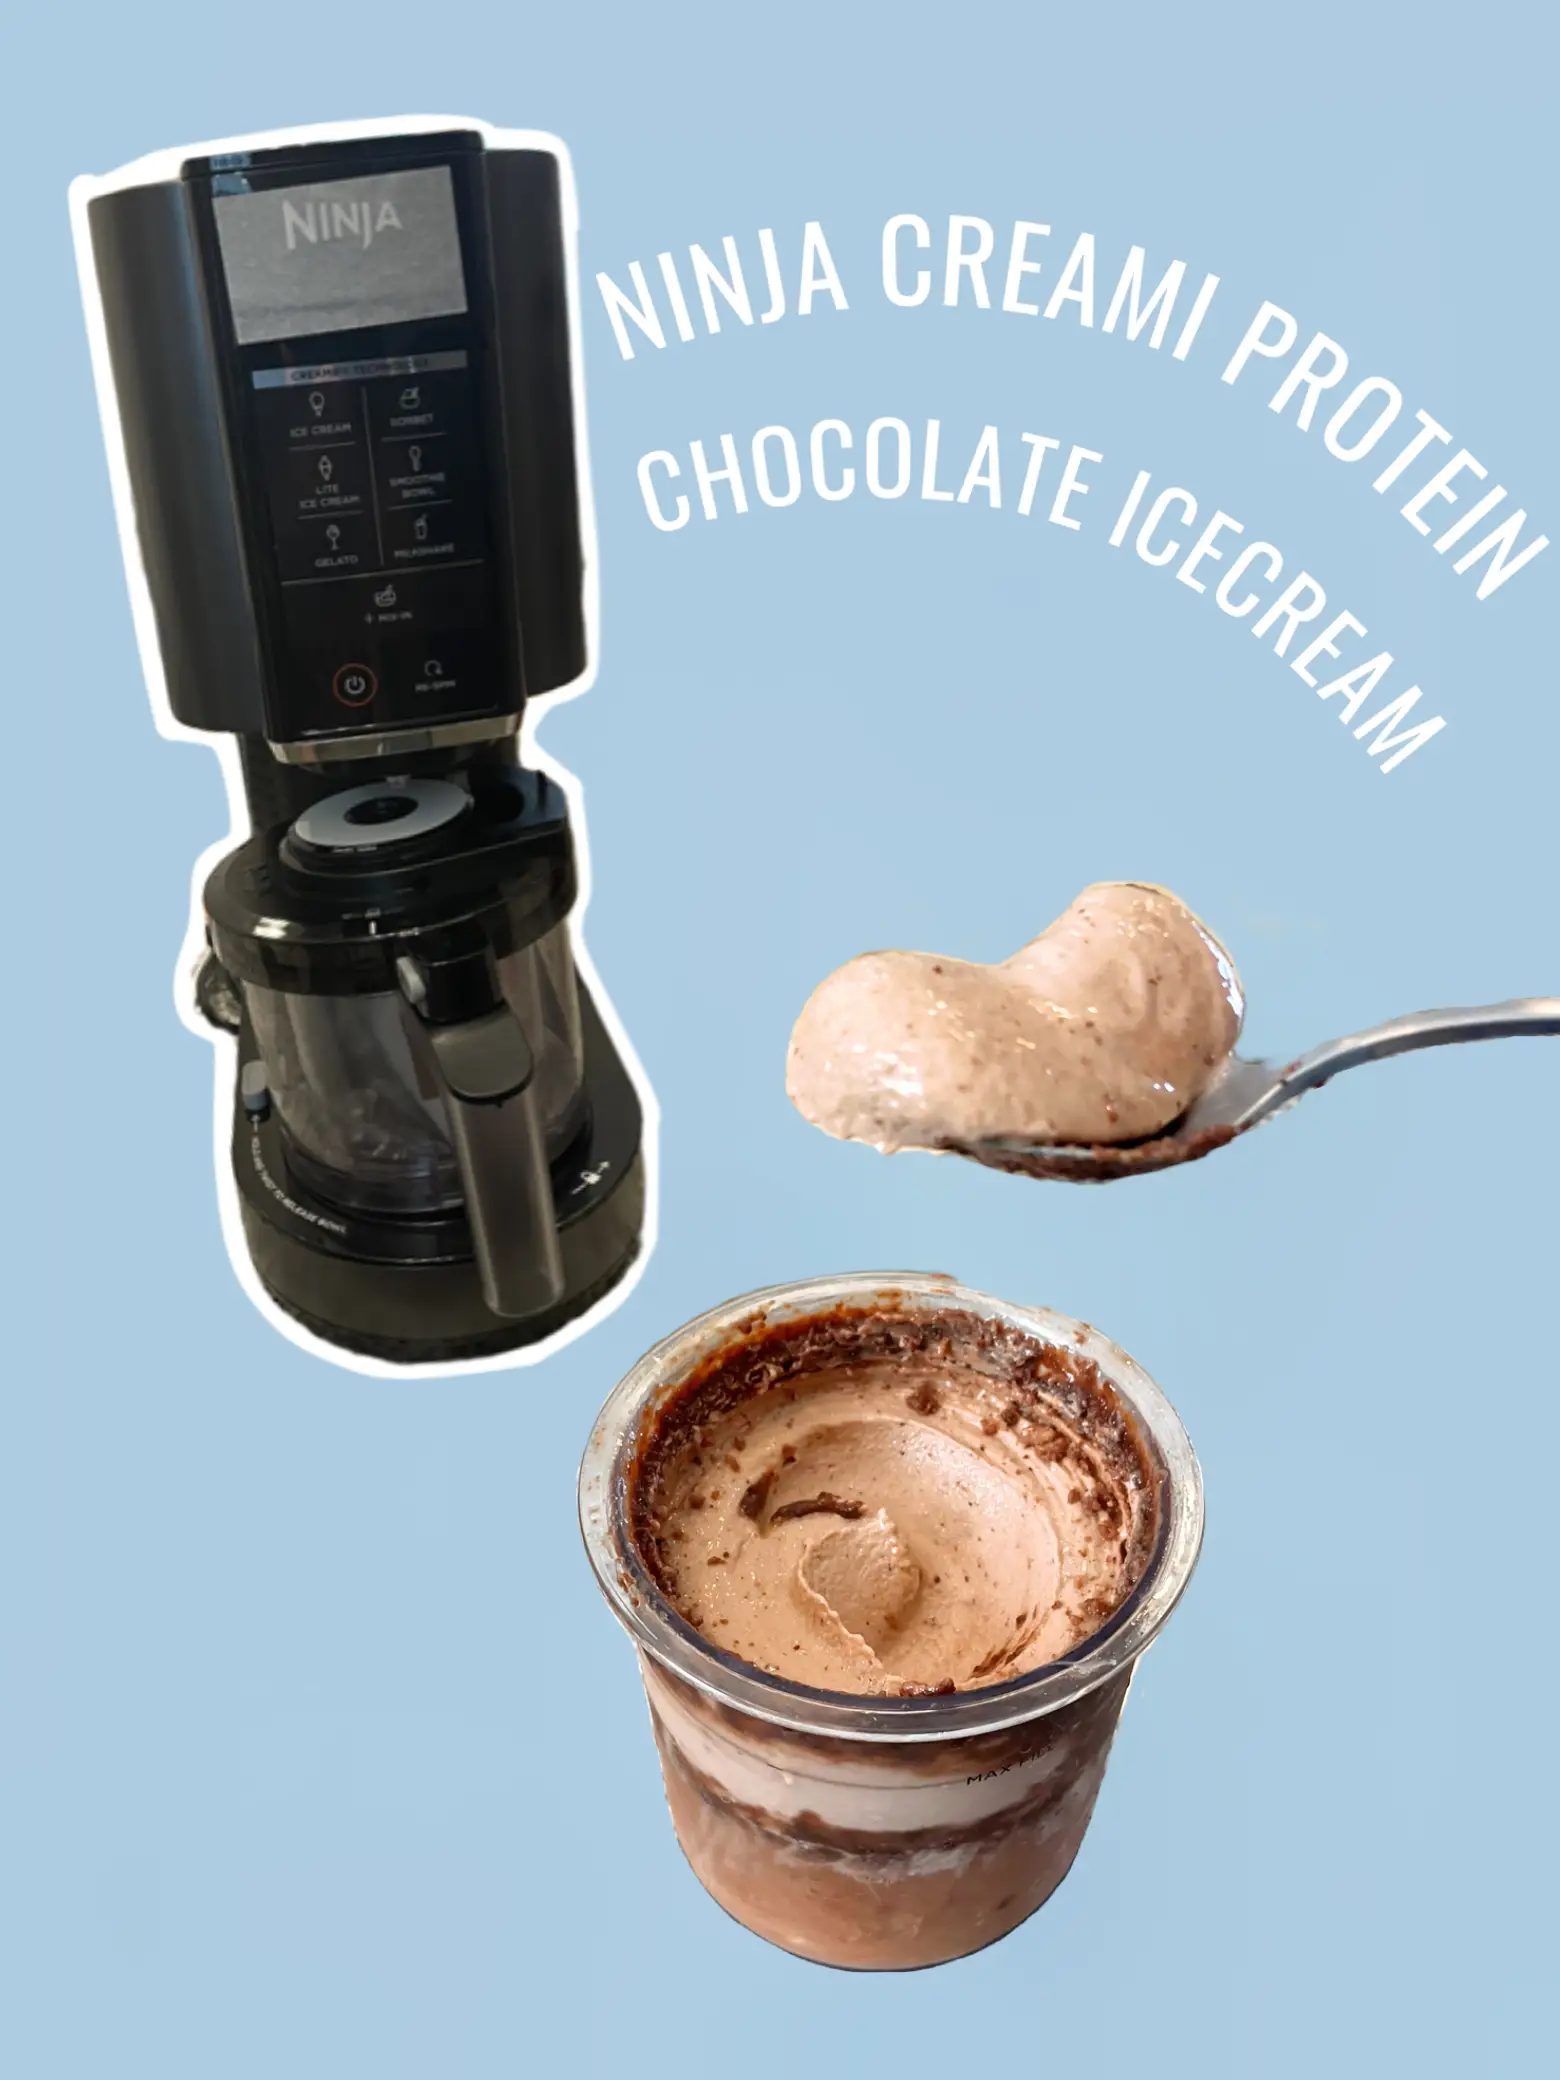 NINJA CREAMI CHOCOLATE PROTEIN ICE CREAM 🍫🍦, Gallery posted by Meredith